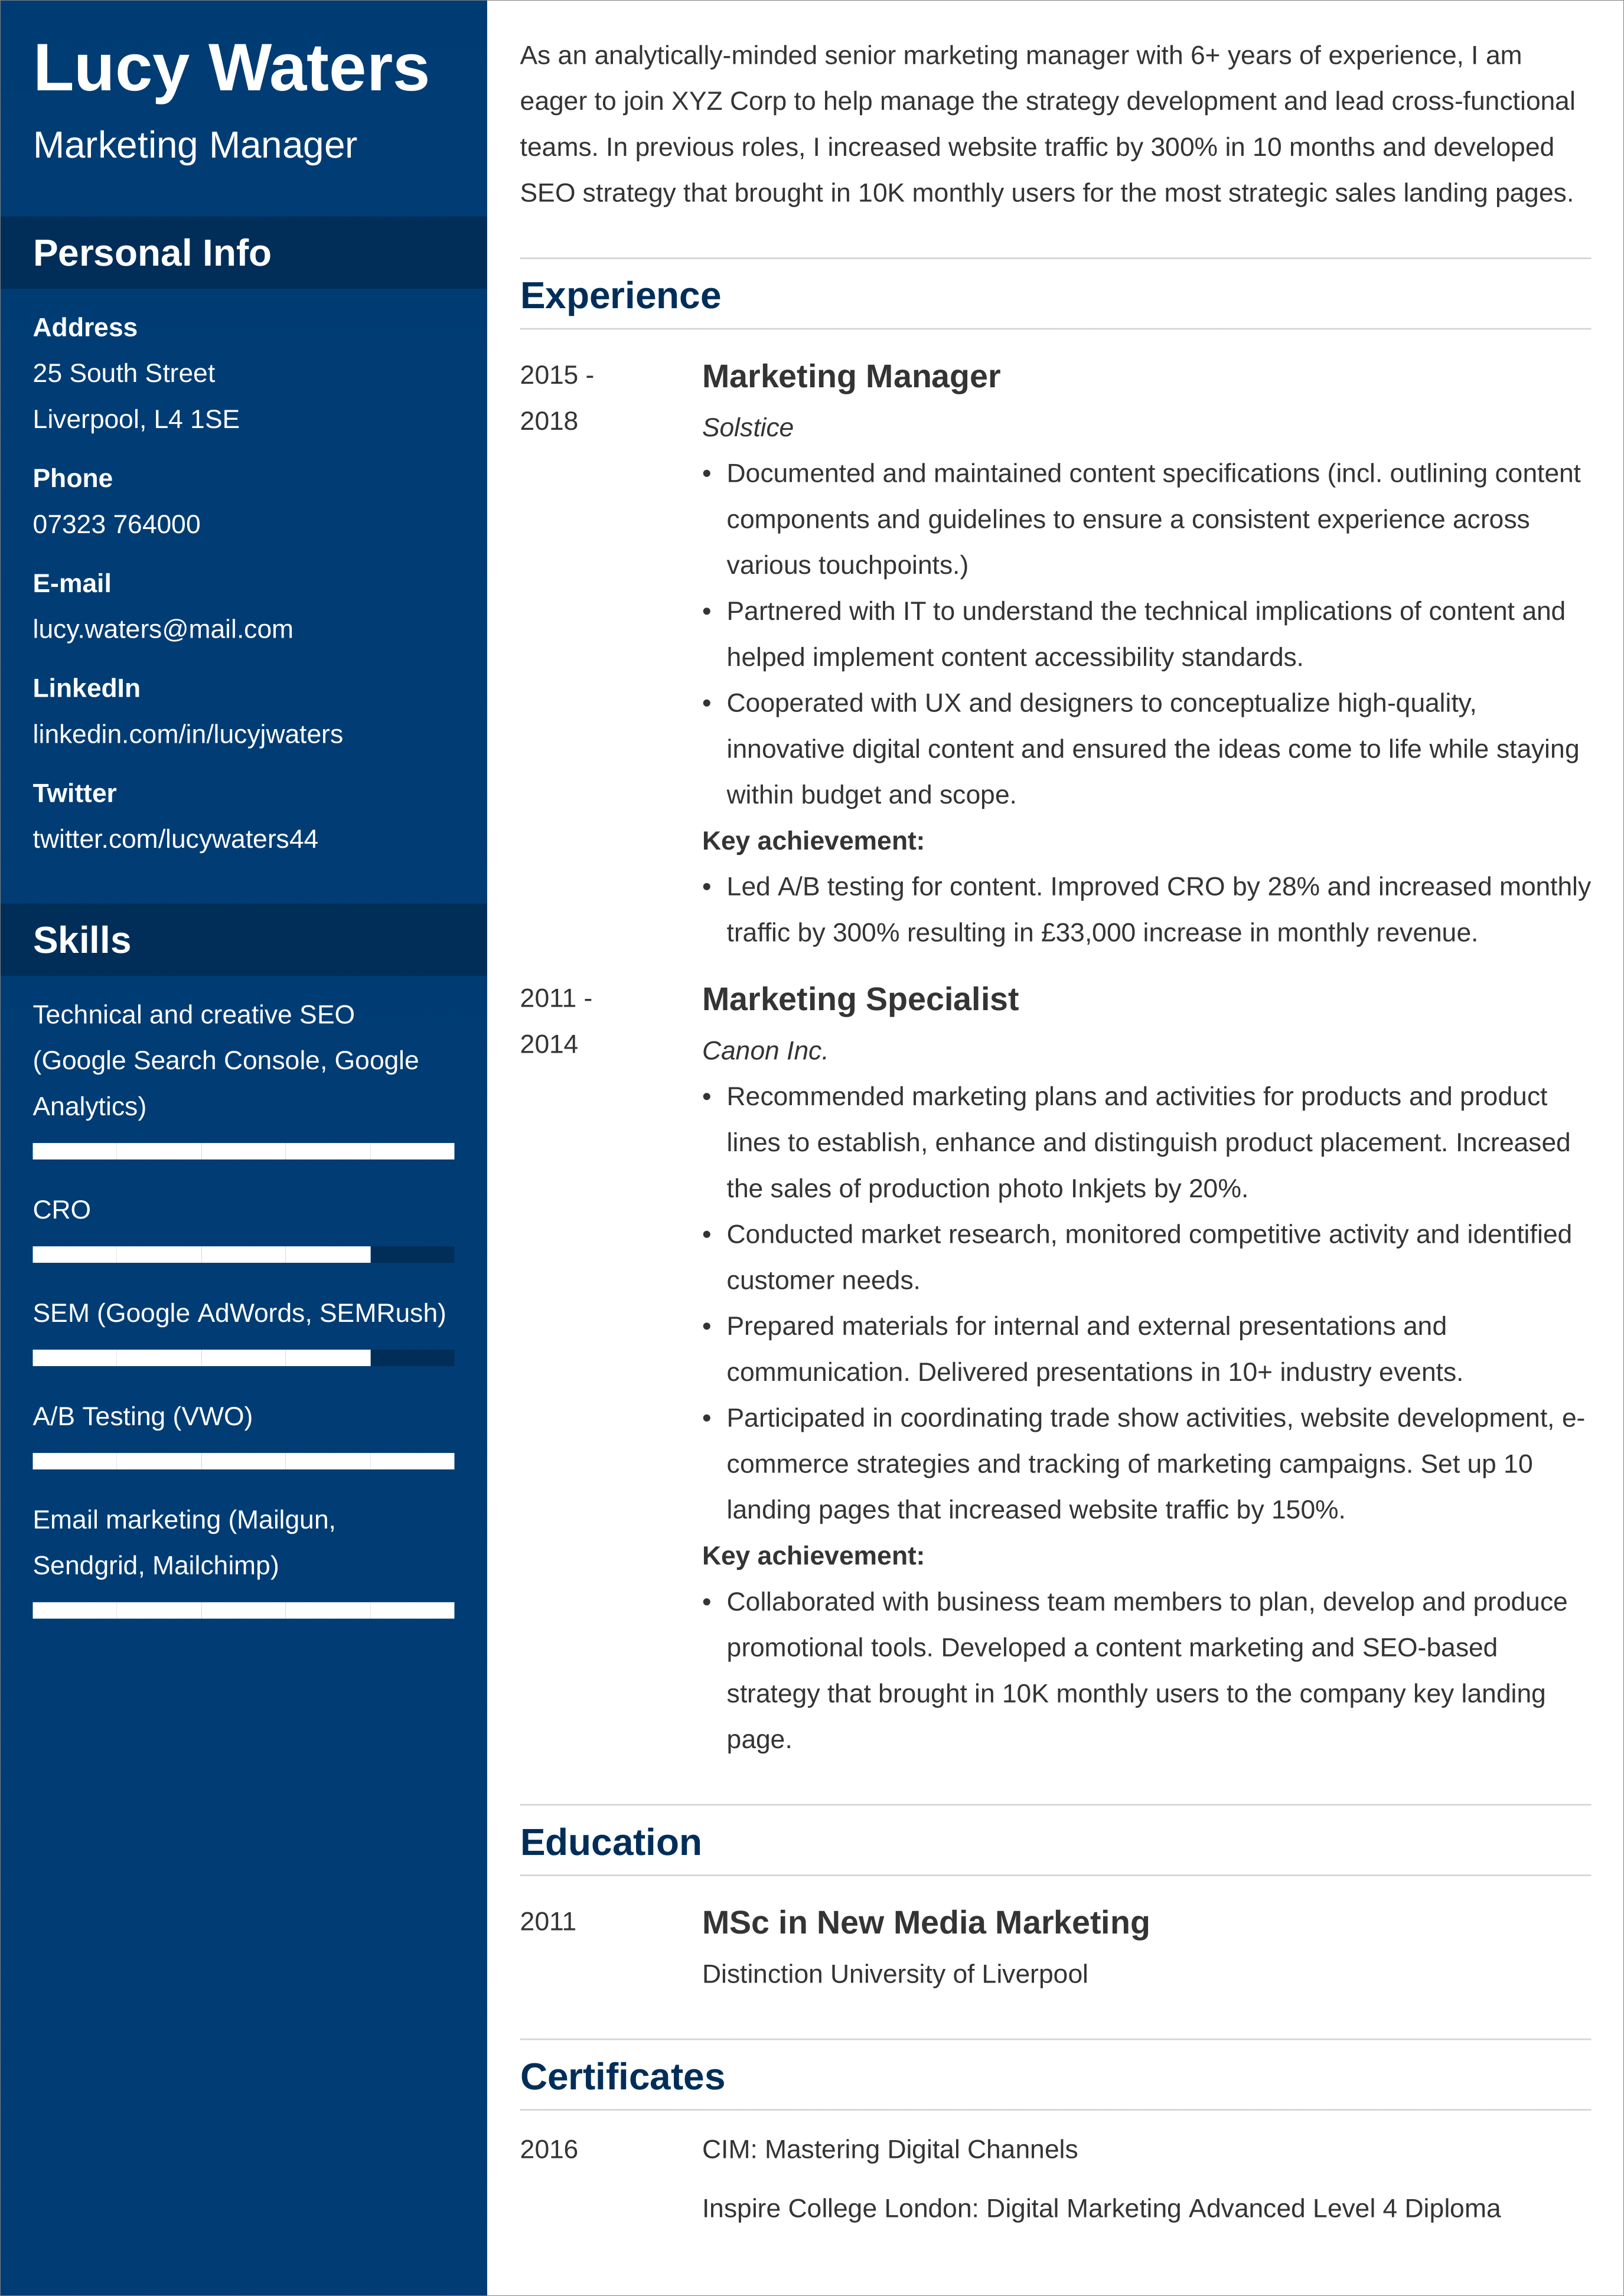 How to Write a Good CV for a UK Job: Tips & Examples